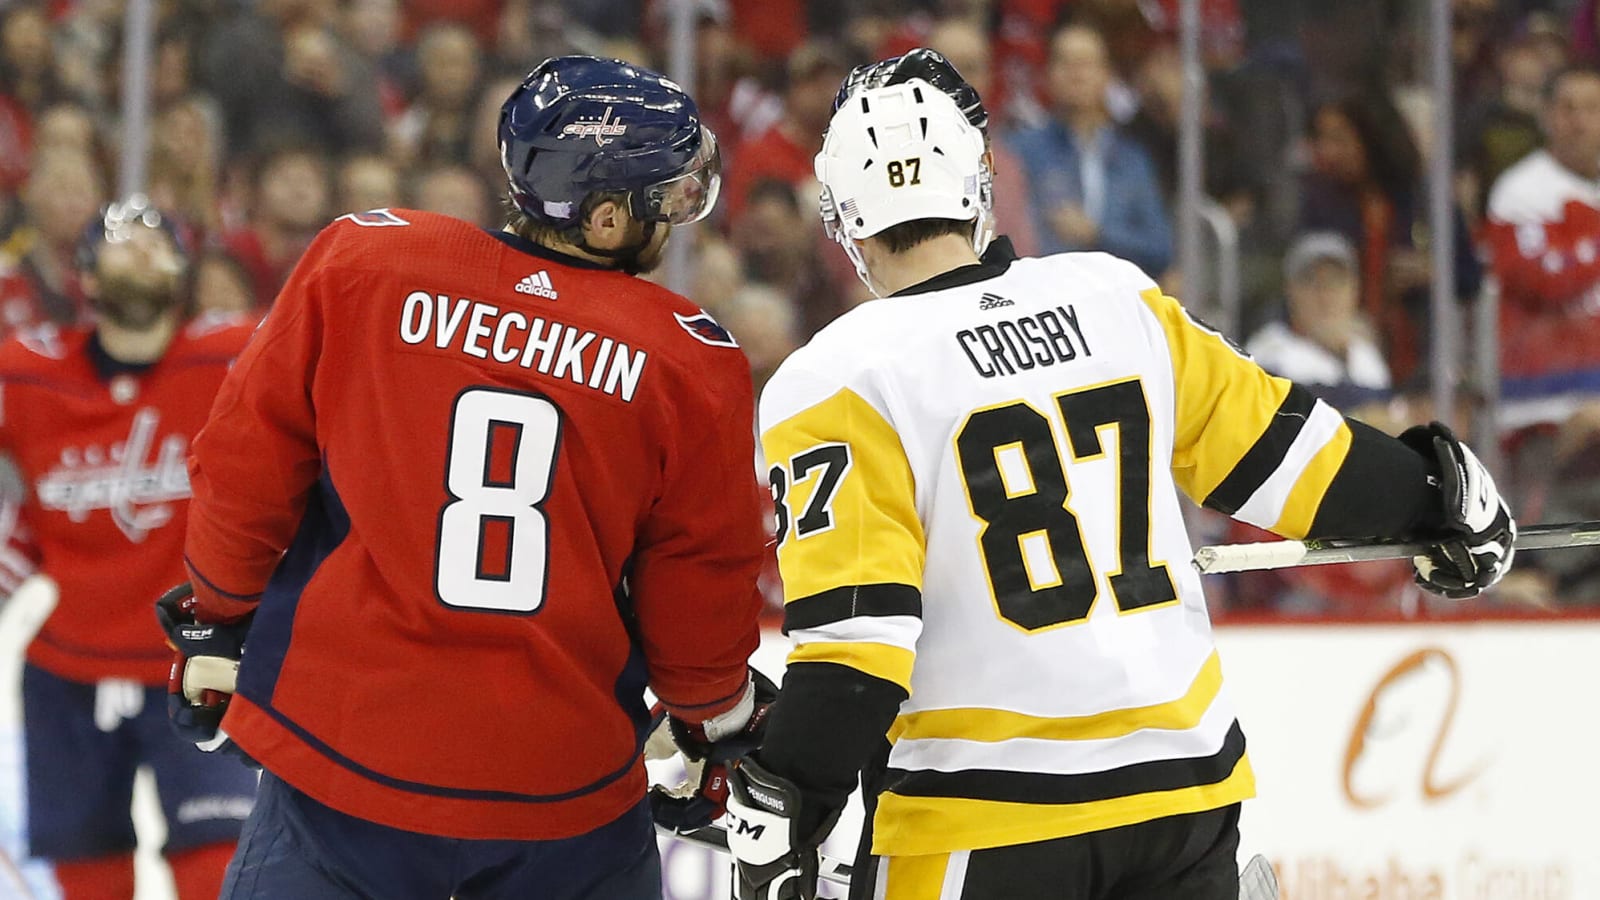 Ovechkin answers who he would want as linemate with Sidney Crosby